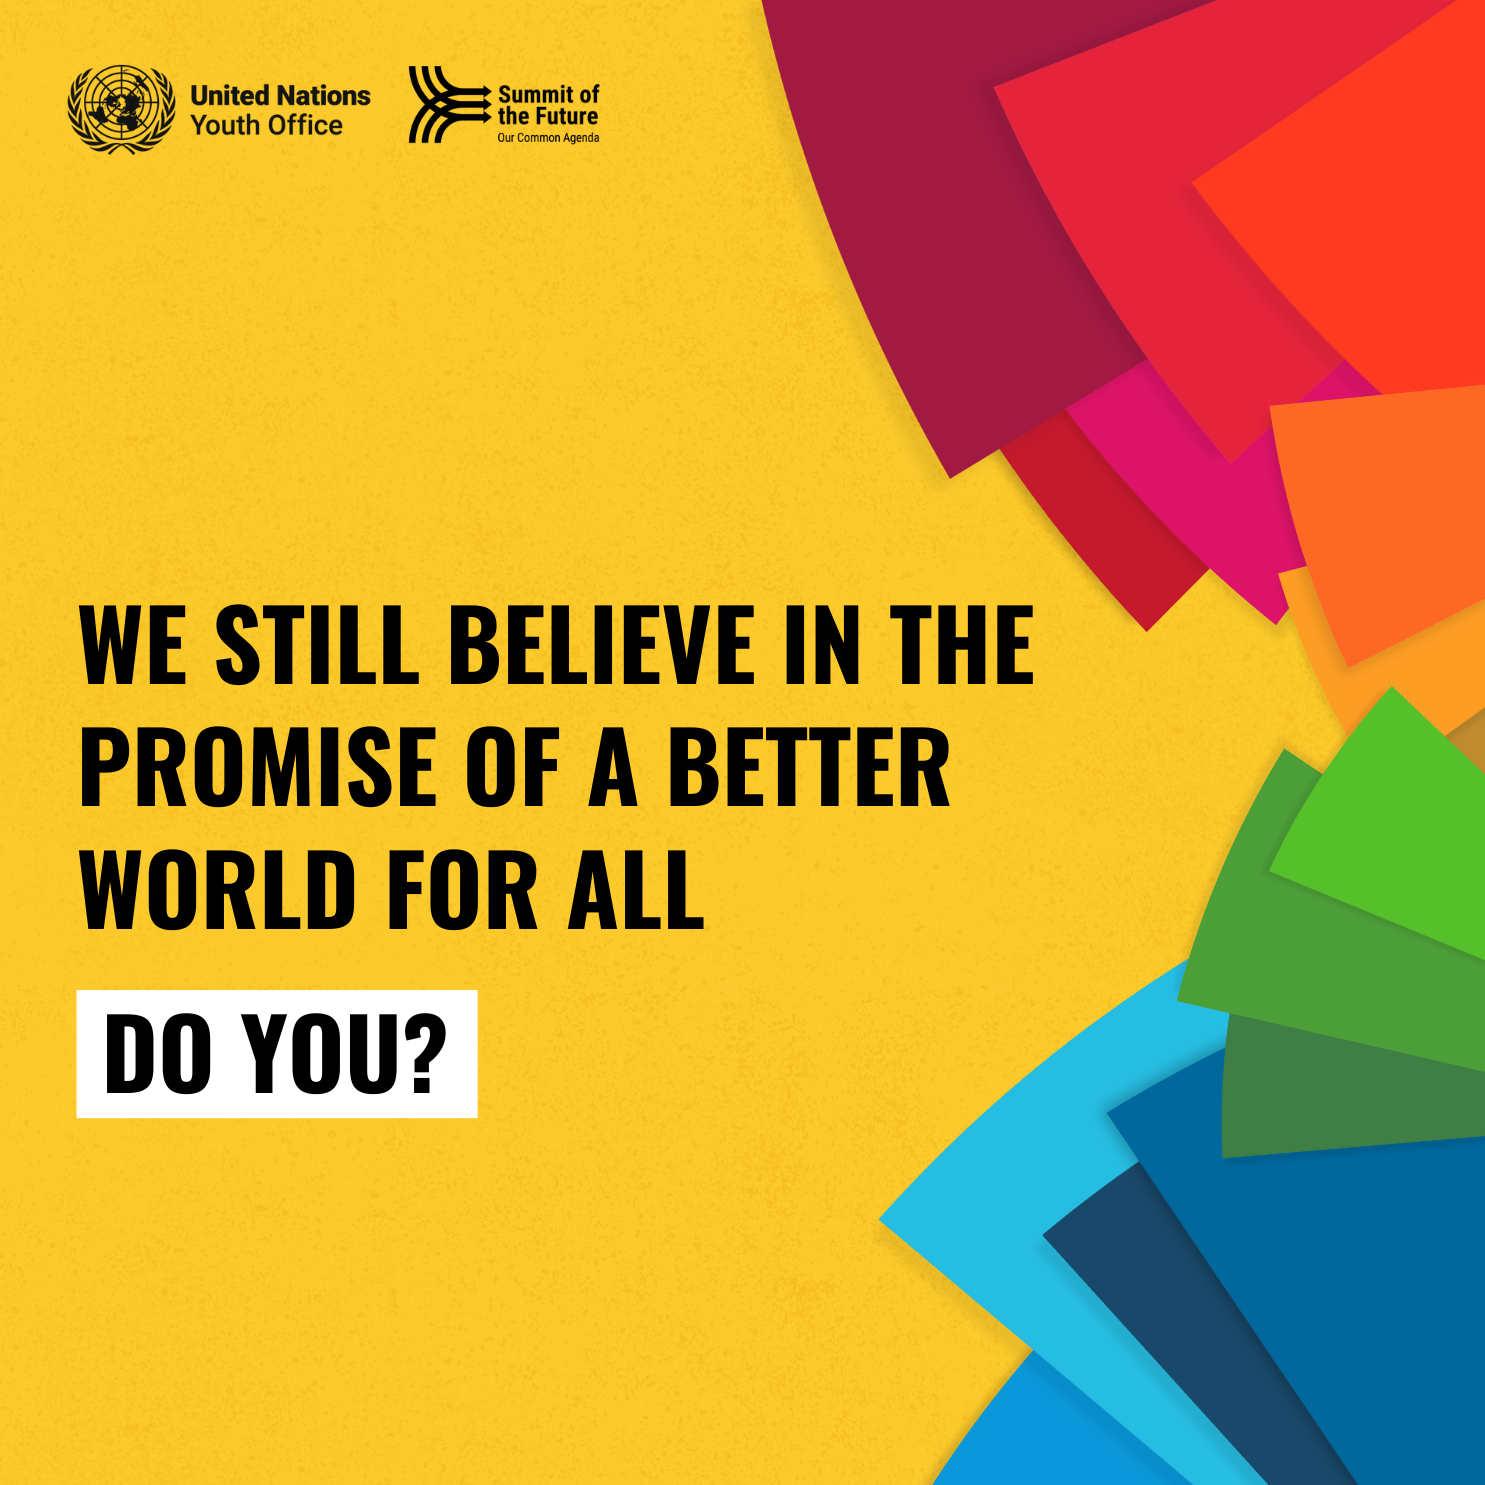 we still belive in the promise of a better world for all, do you?